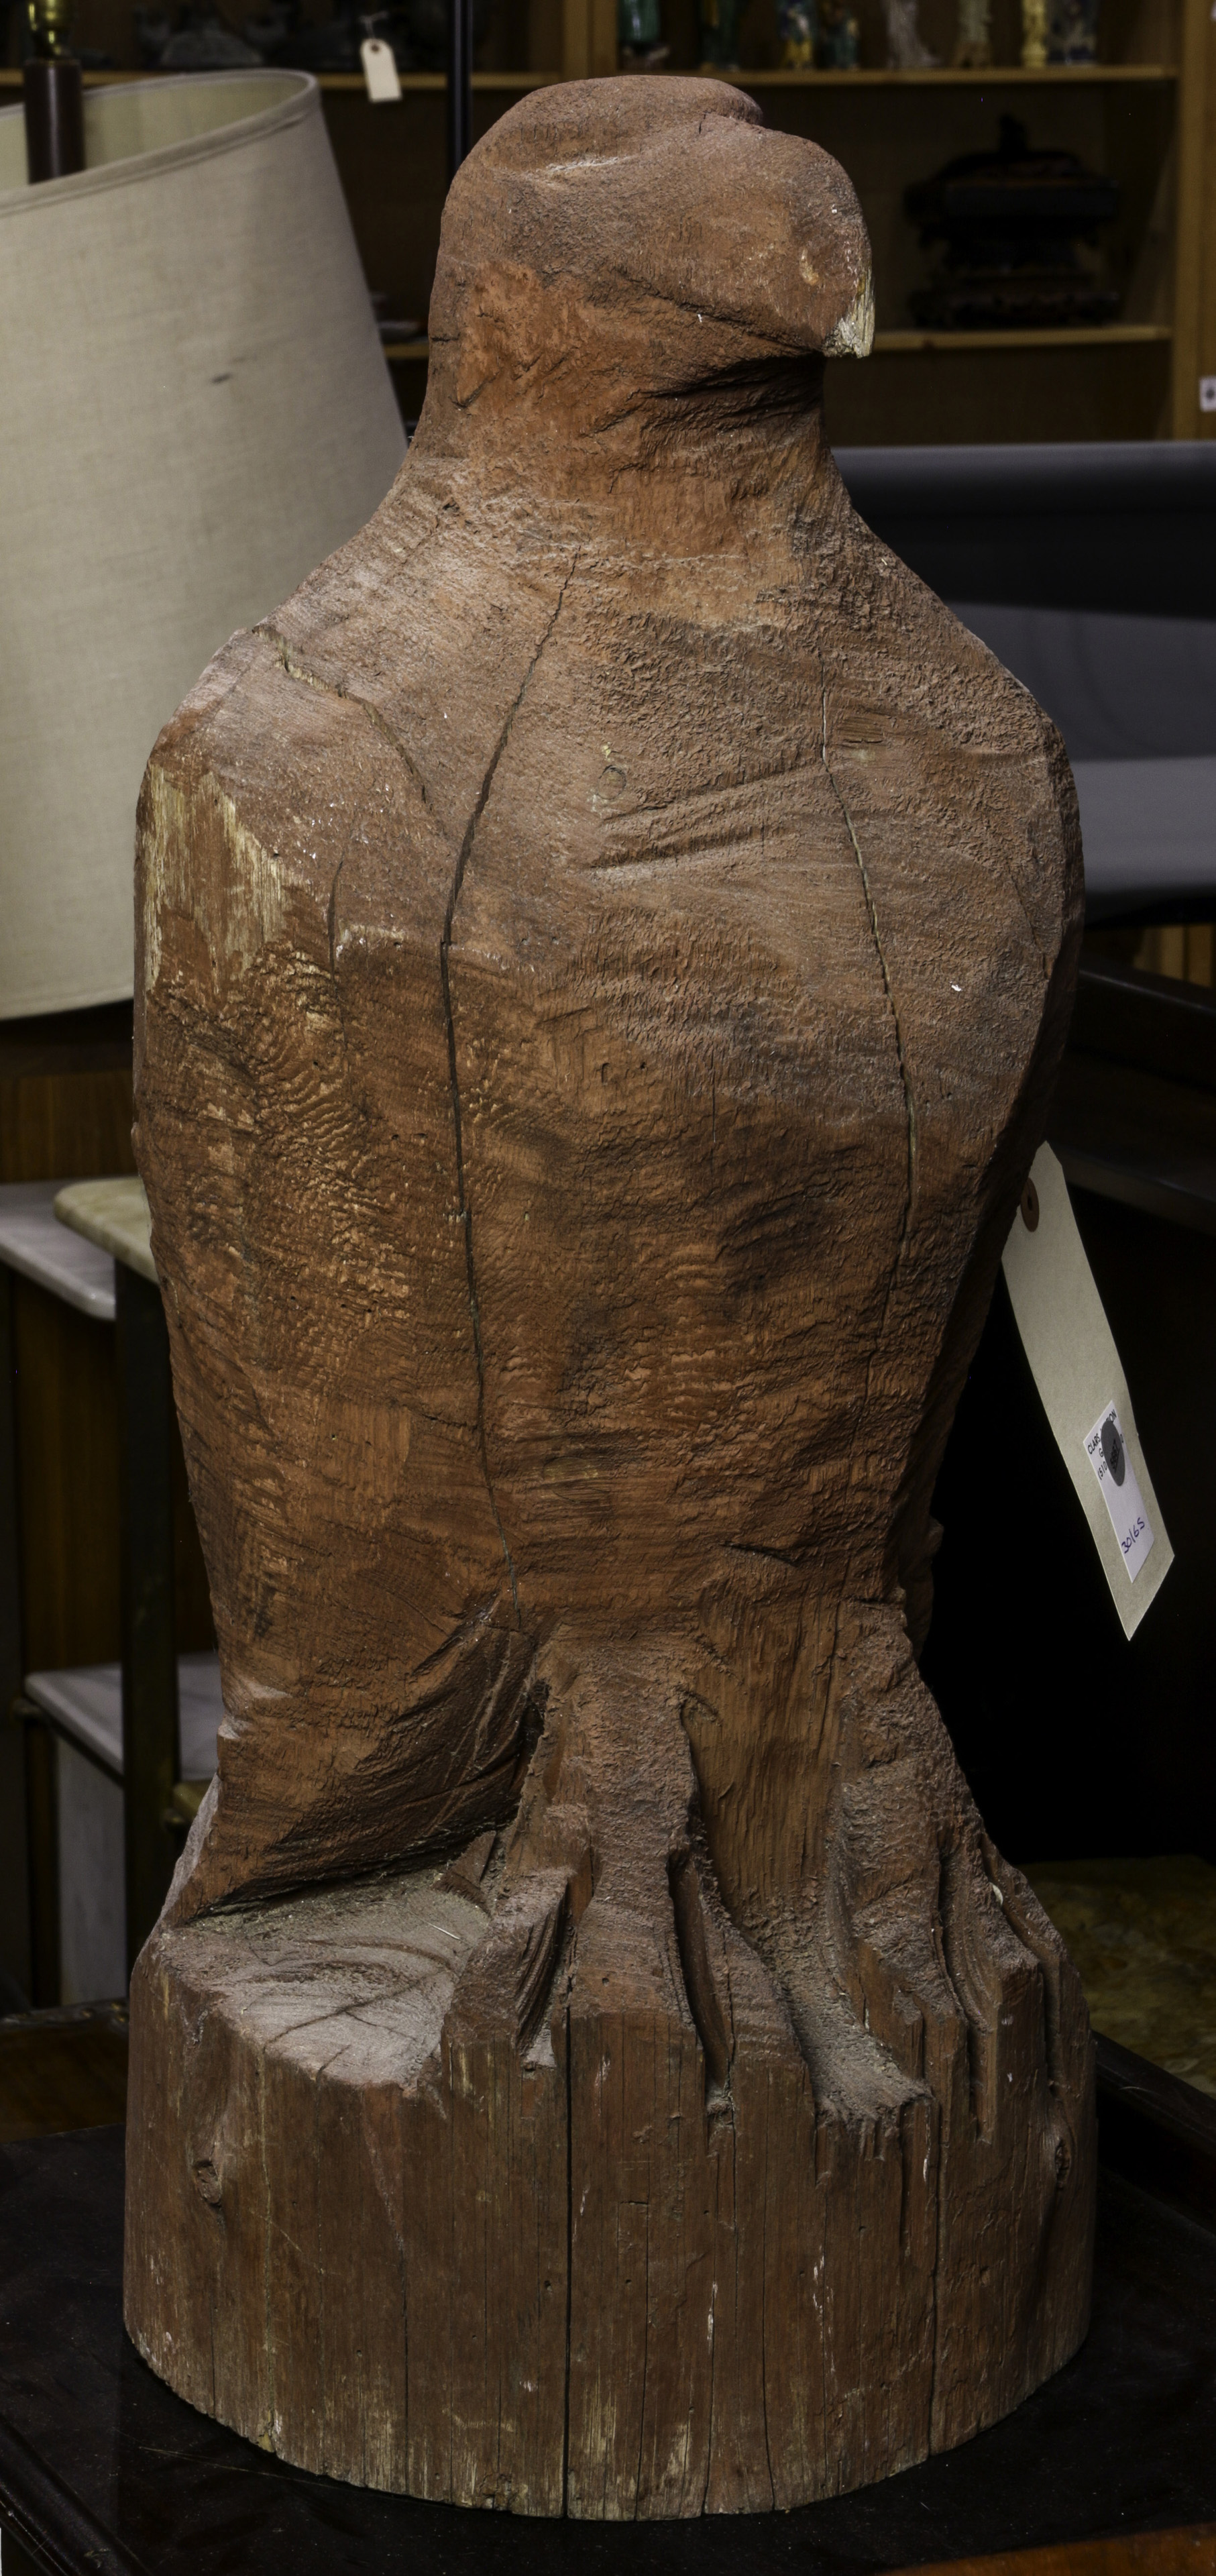 A CARVED WOOD FIGURE OF AN EAGLE A carved